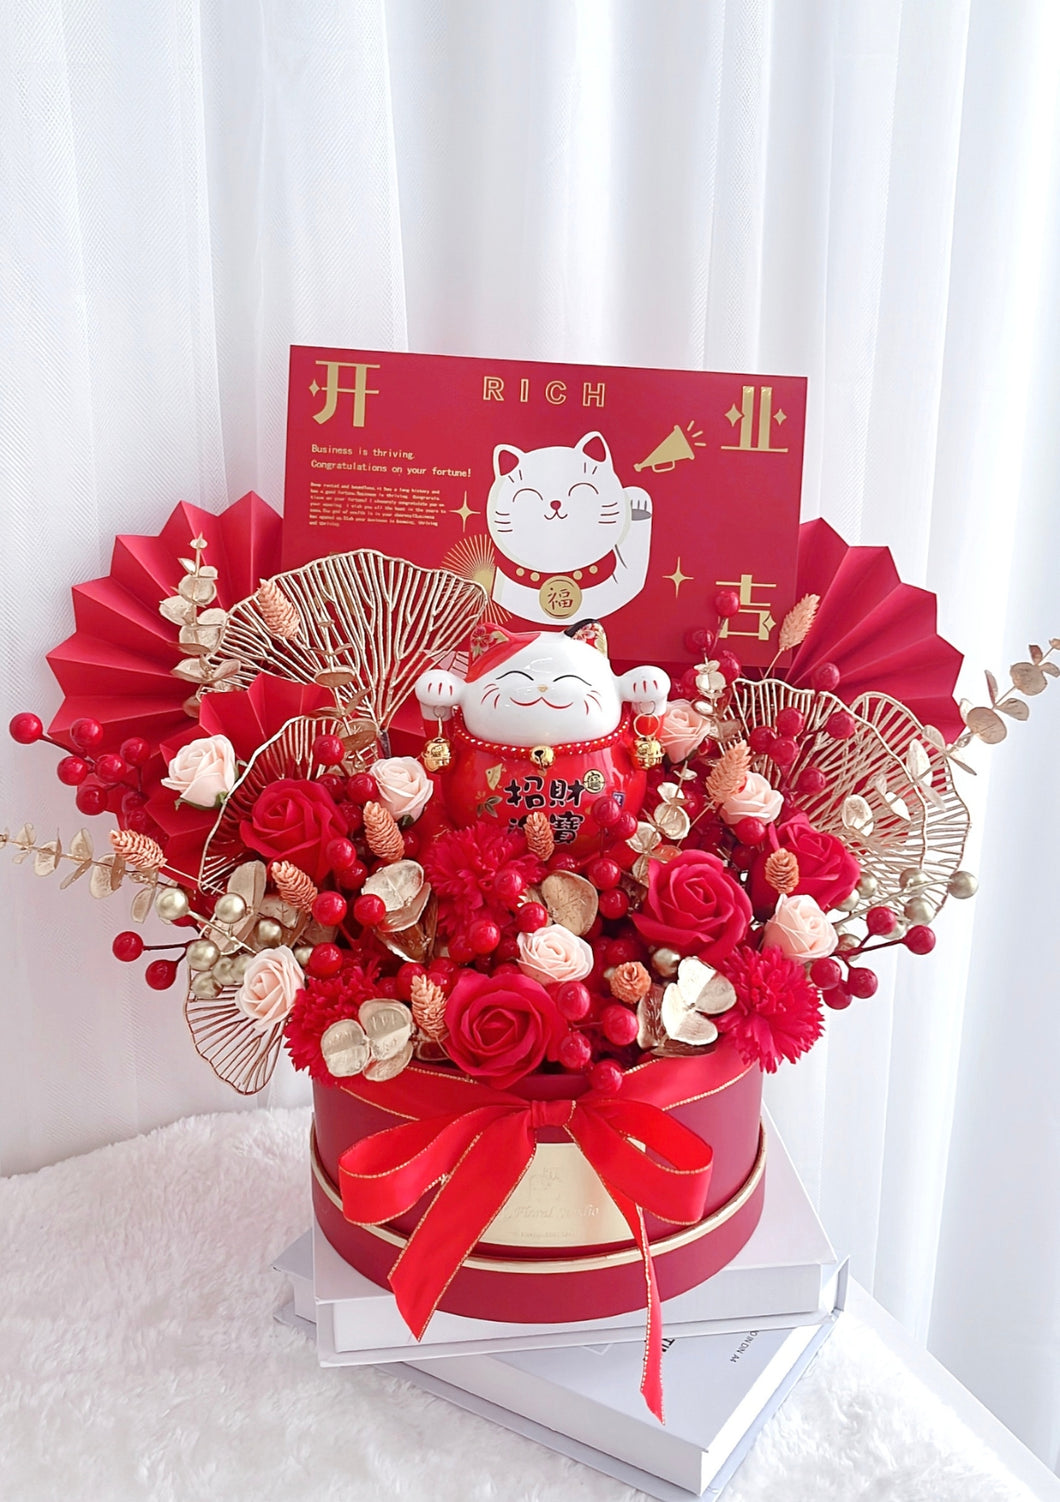 Grand Opening Fortune Cat with Red Soap Flower Bucket 开业招财猫香皂花抱抱桶